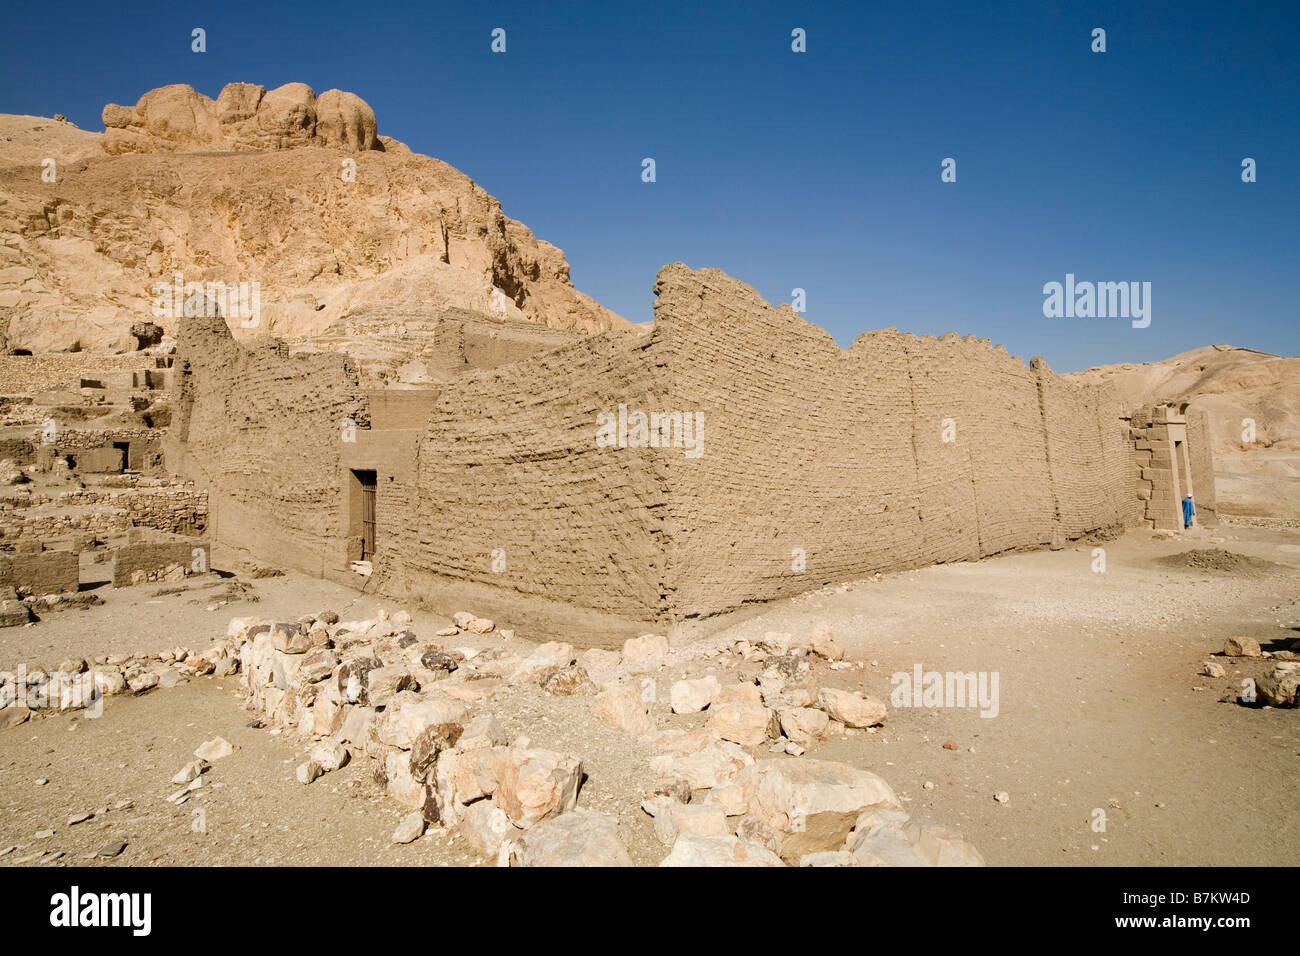 The Ptolemaic Temple at Deir el Medina: The Workers' Village on the West Bank Luxor, Egypt Stock Photo